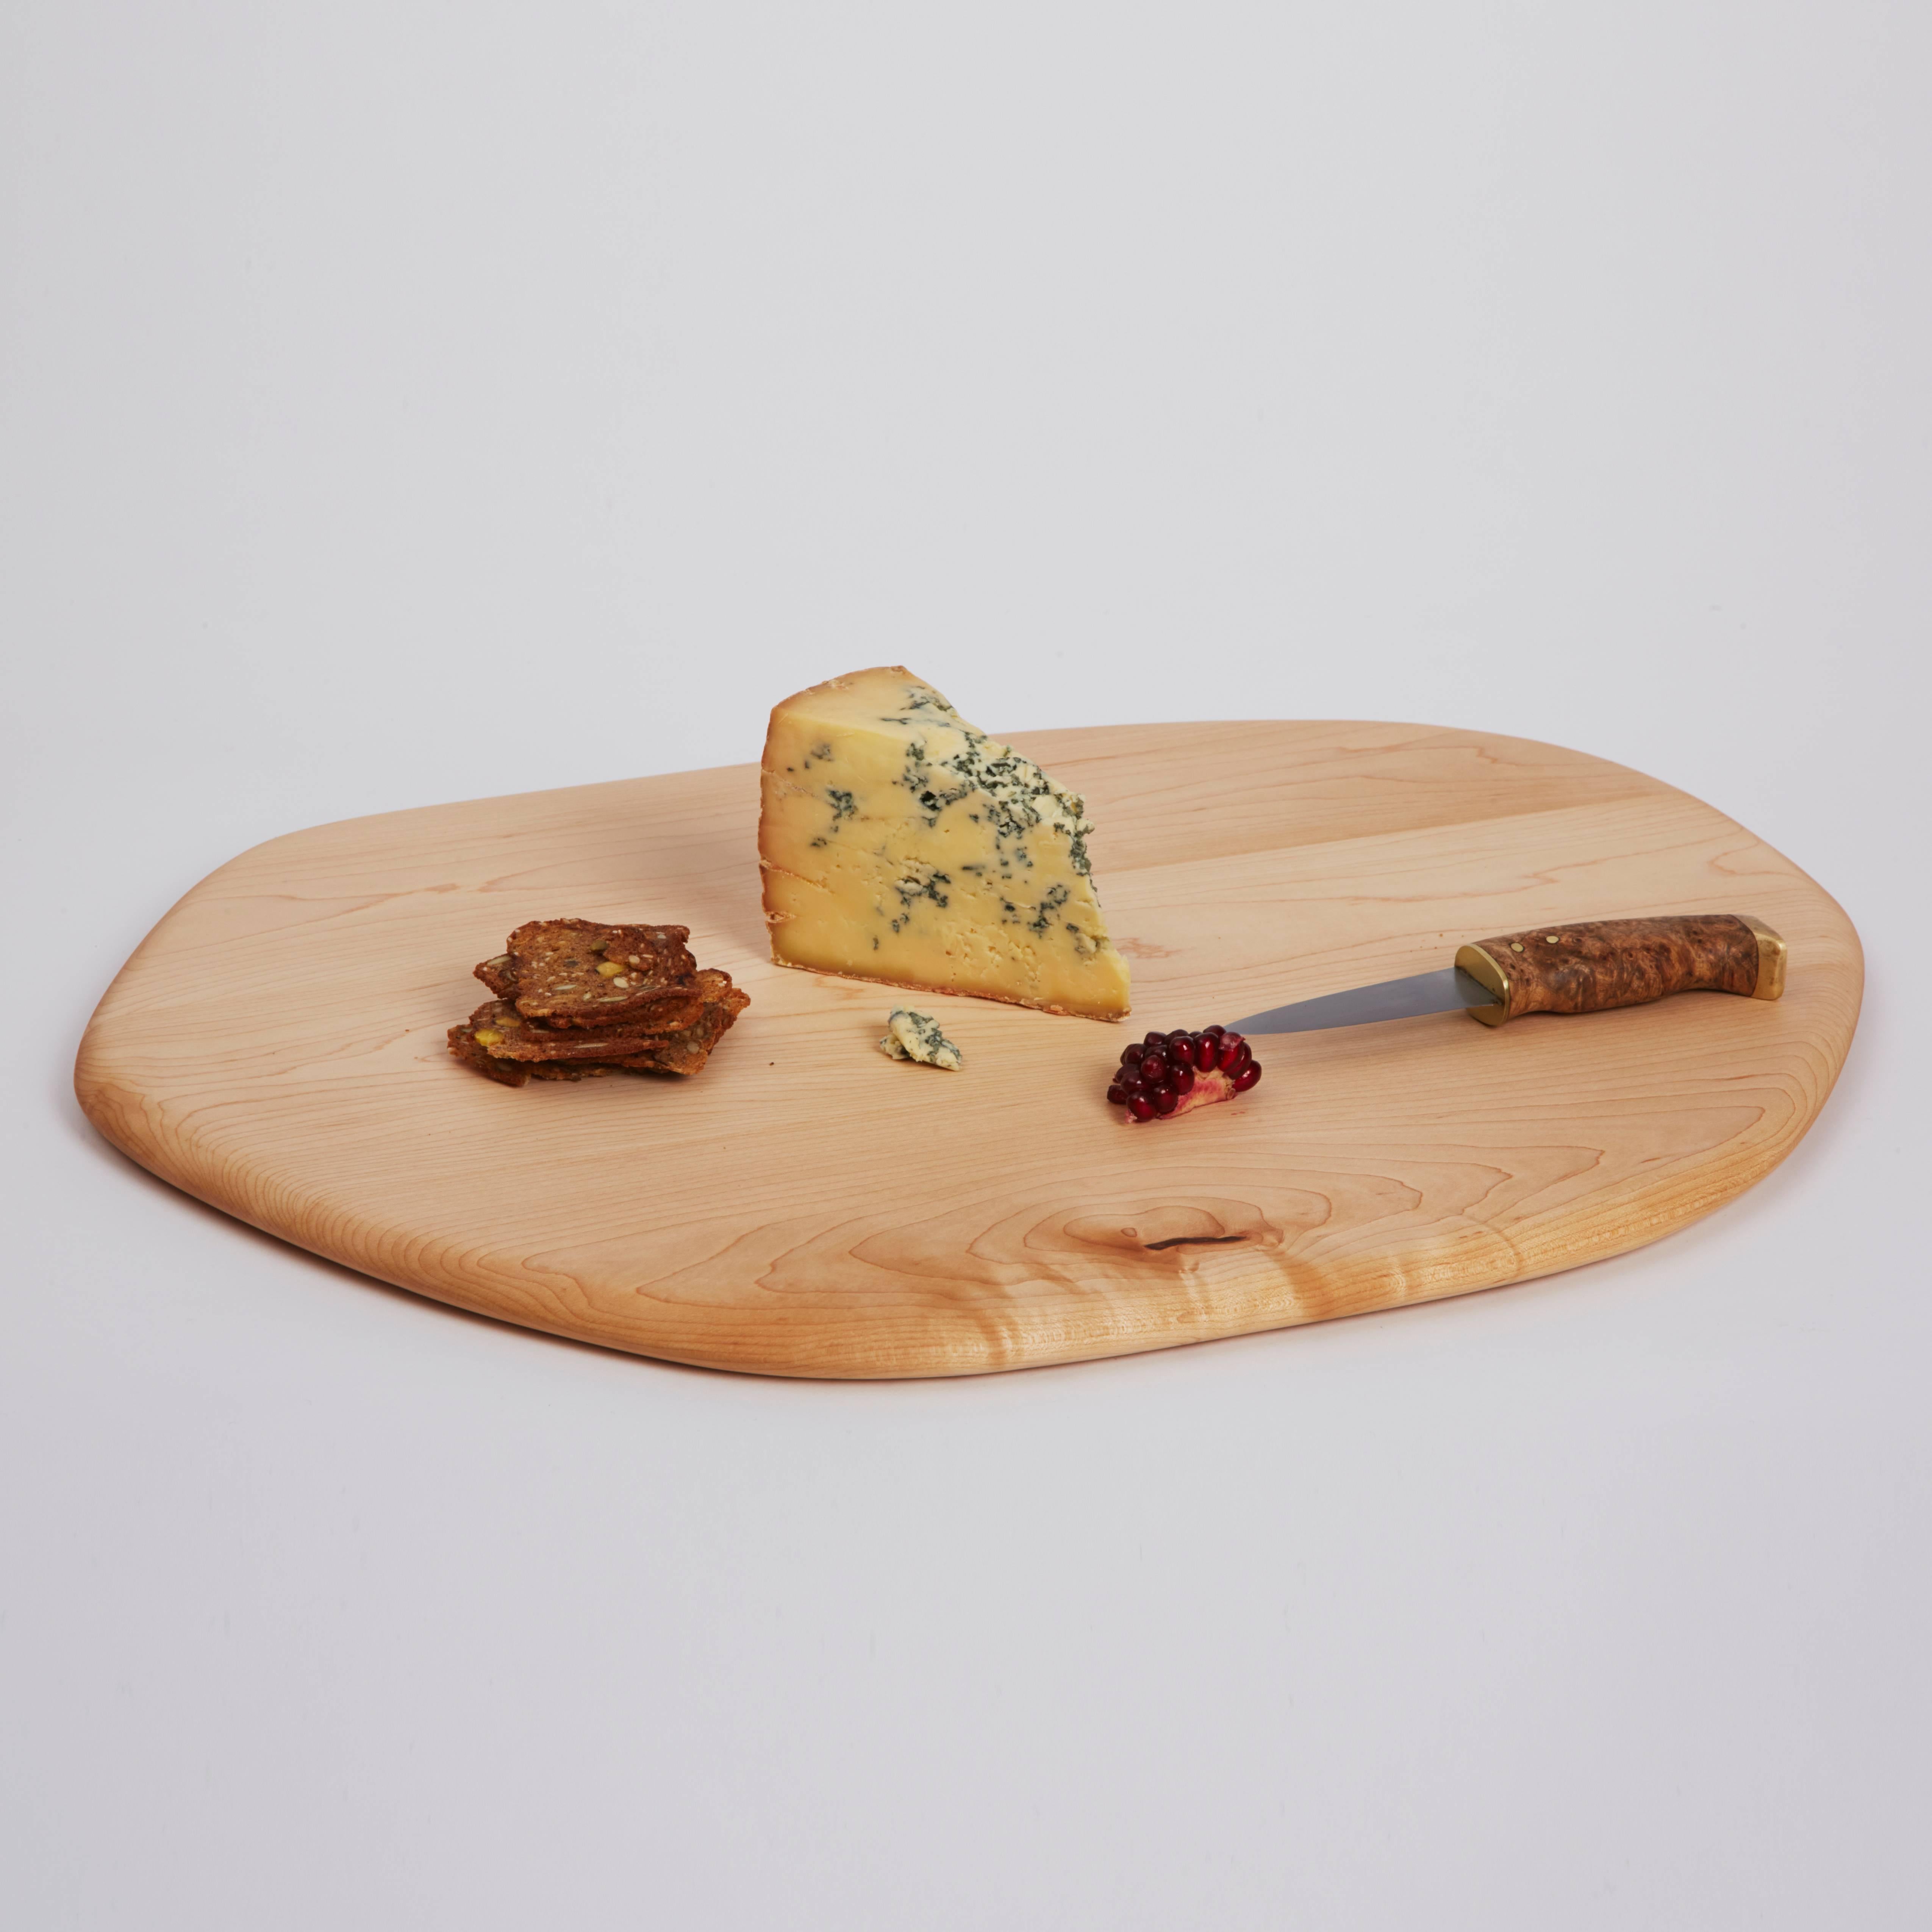 Handcrafted in Brooklyn, Noah Spencer carefully selects wood with beautiful grain patterns to create each Pebble Cutting Board. These sculptural and functional objects are great for simple kitchen cutting and artful food presentation. 

Care